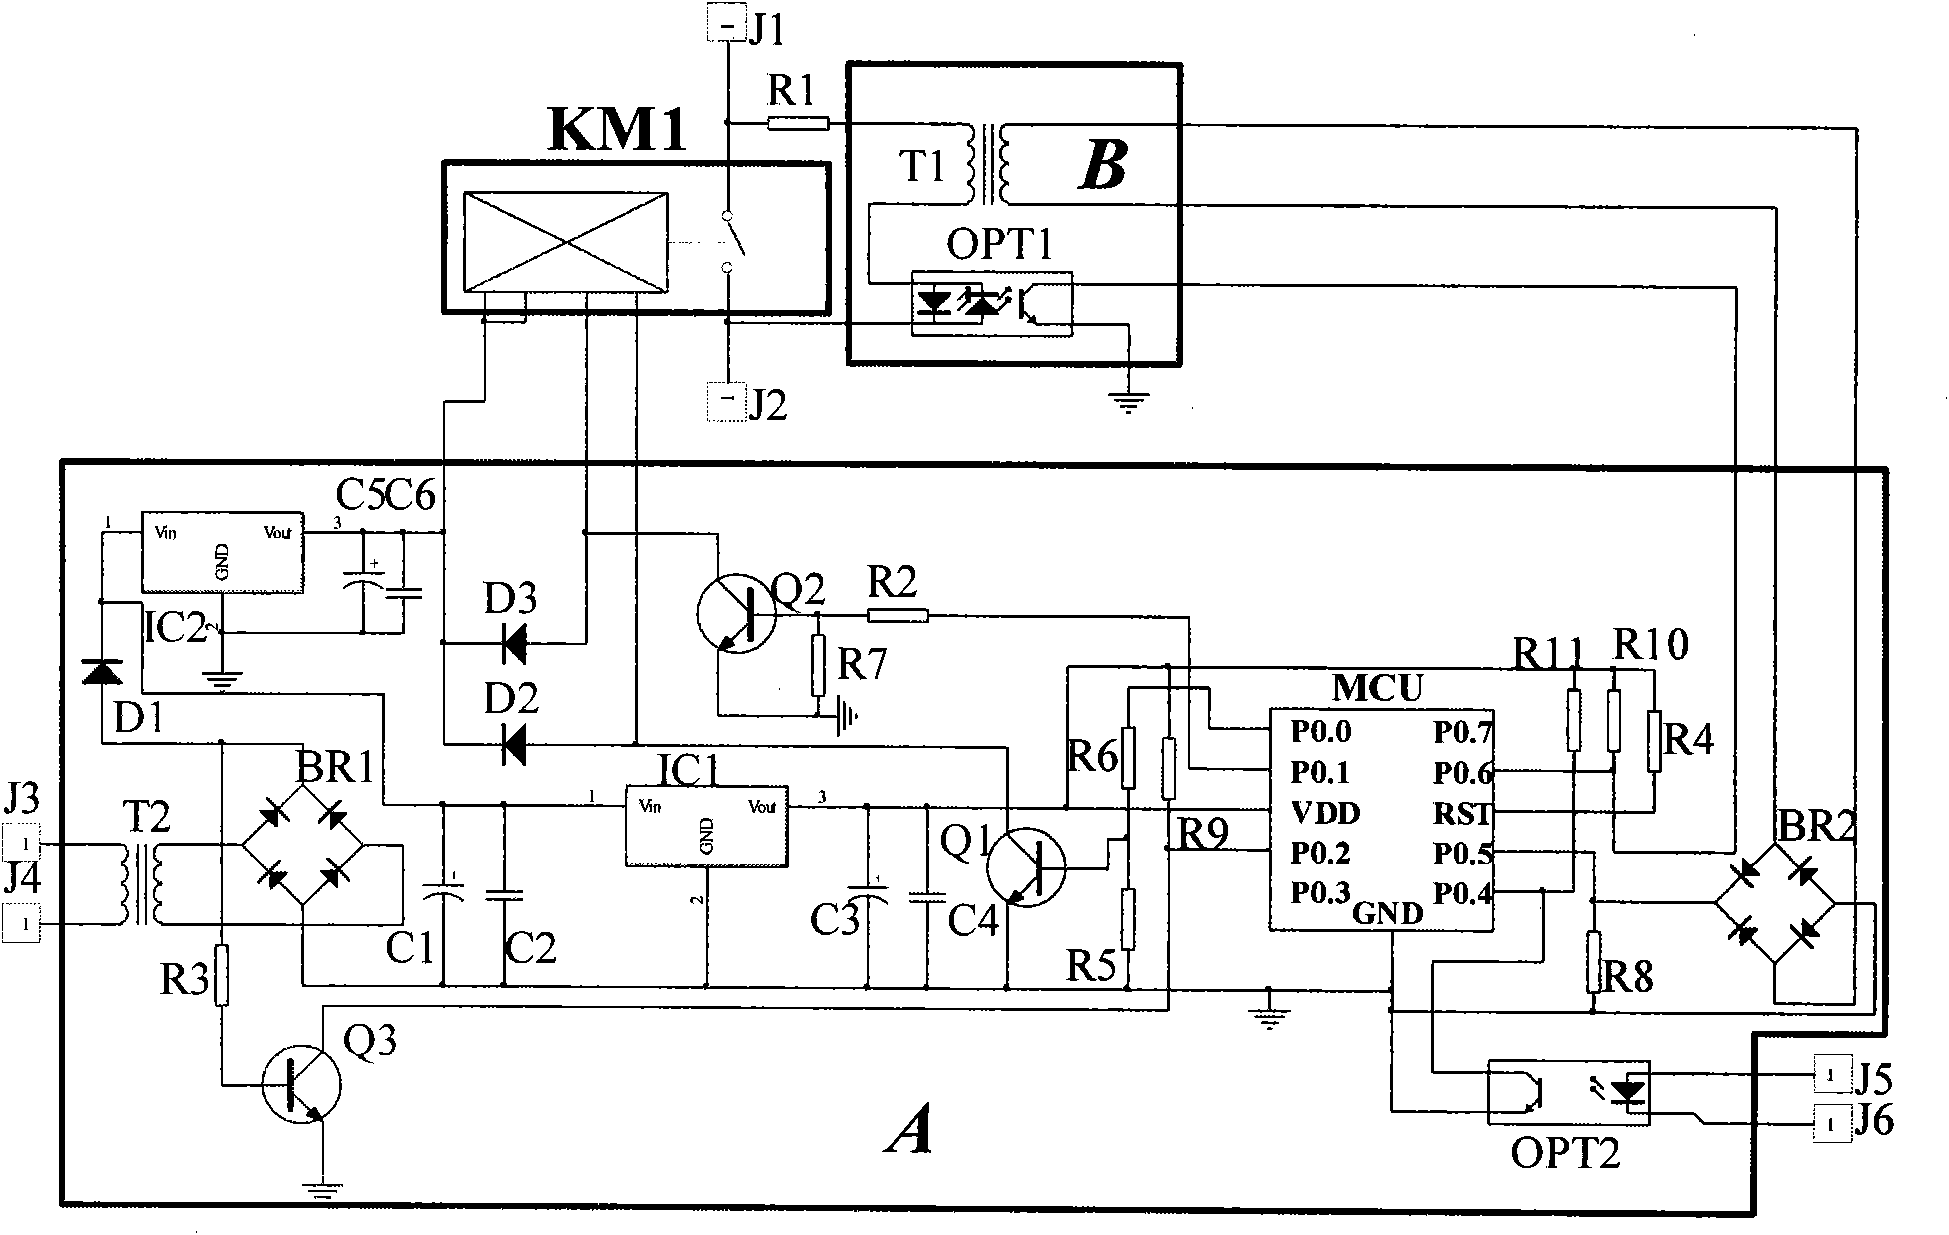 Capacitor switching device